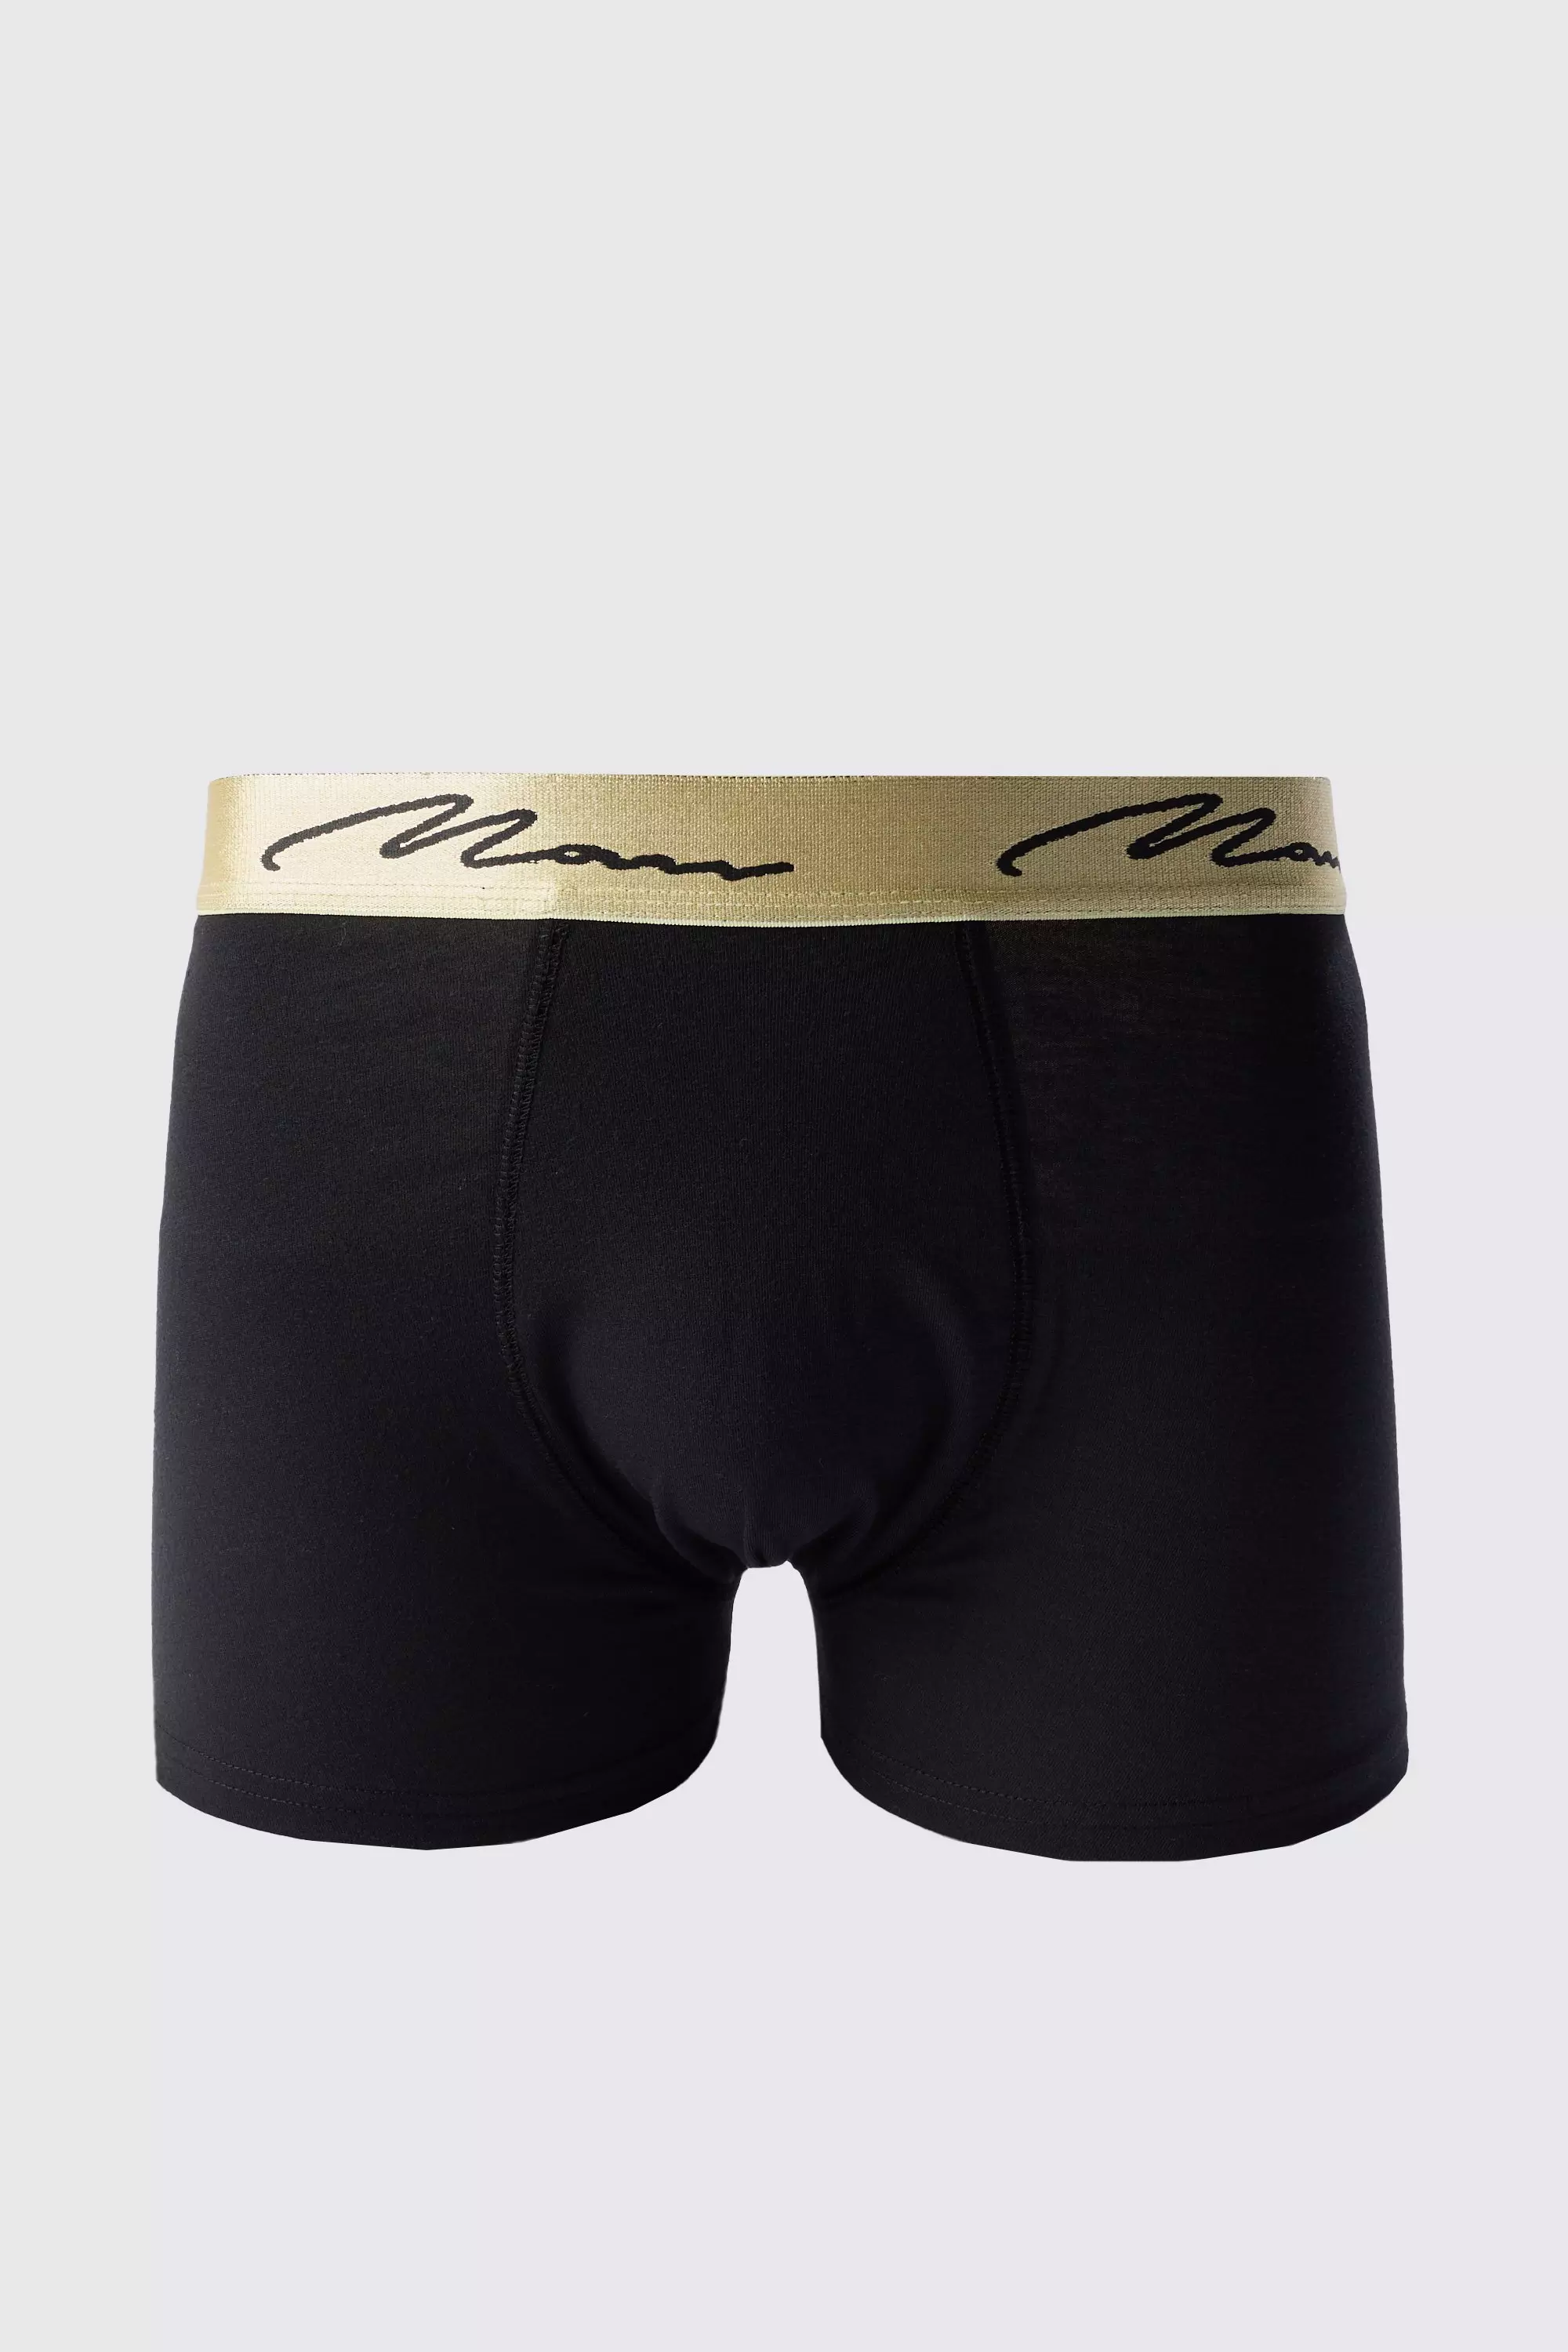 Black Man Signature Gold Waistband Boxers In Black